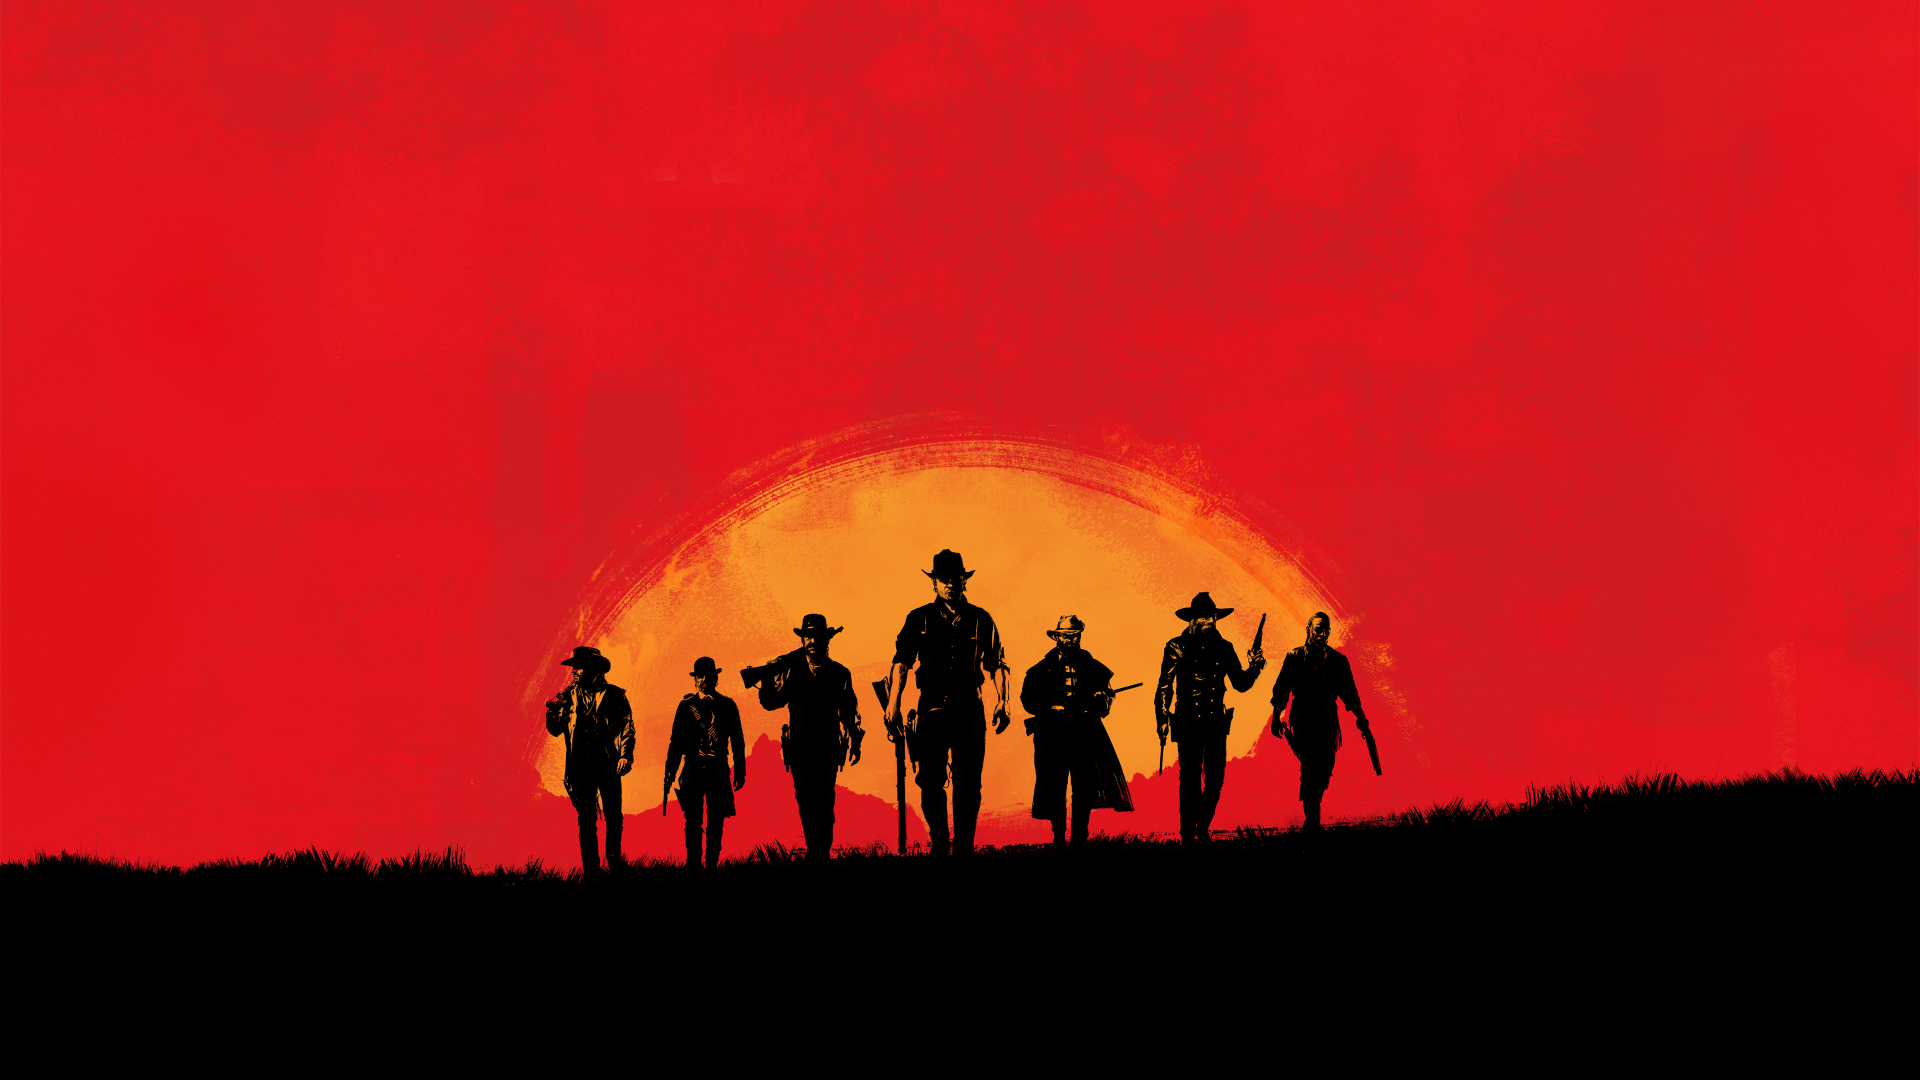 1920x1080 150+ 4K Red Dead Redemption 2 Wallpapers | Background Images